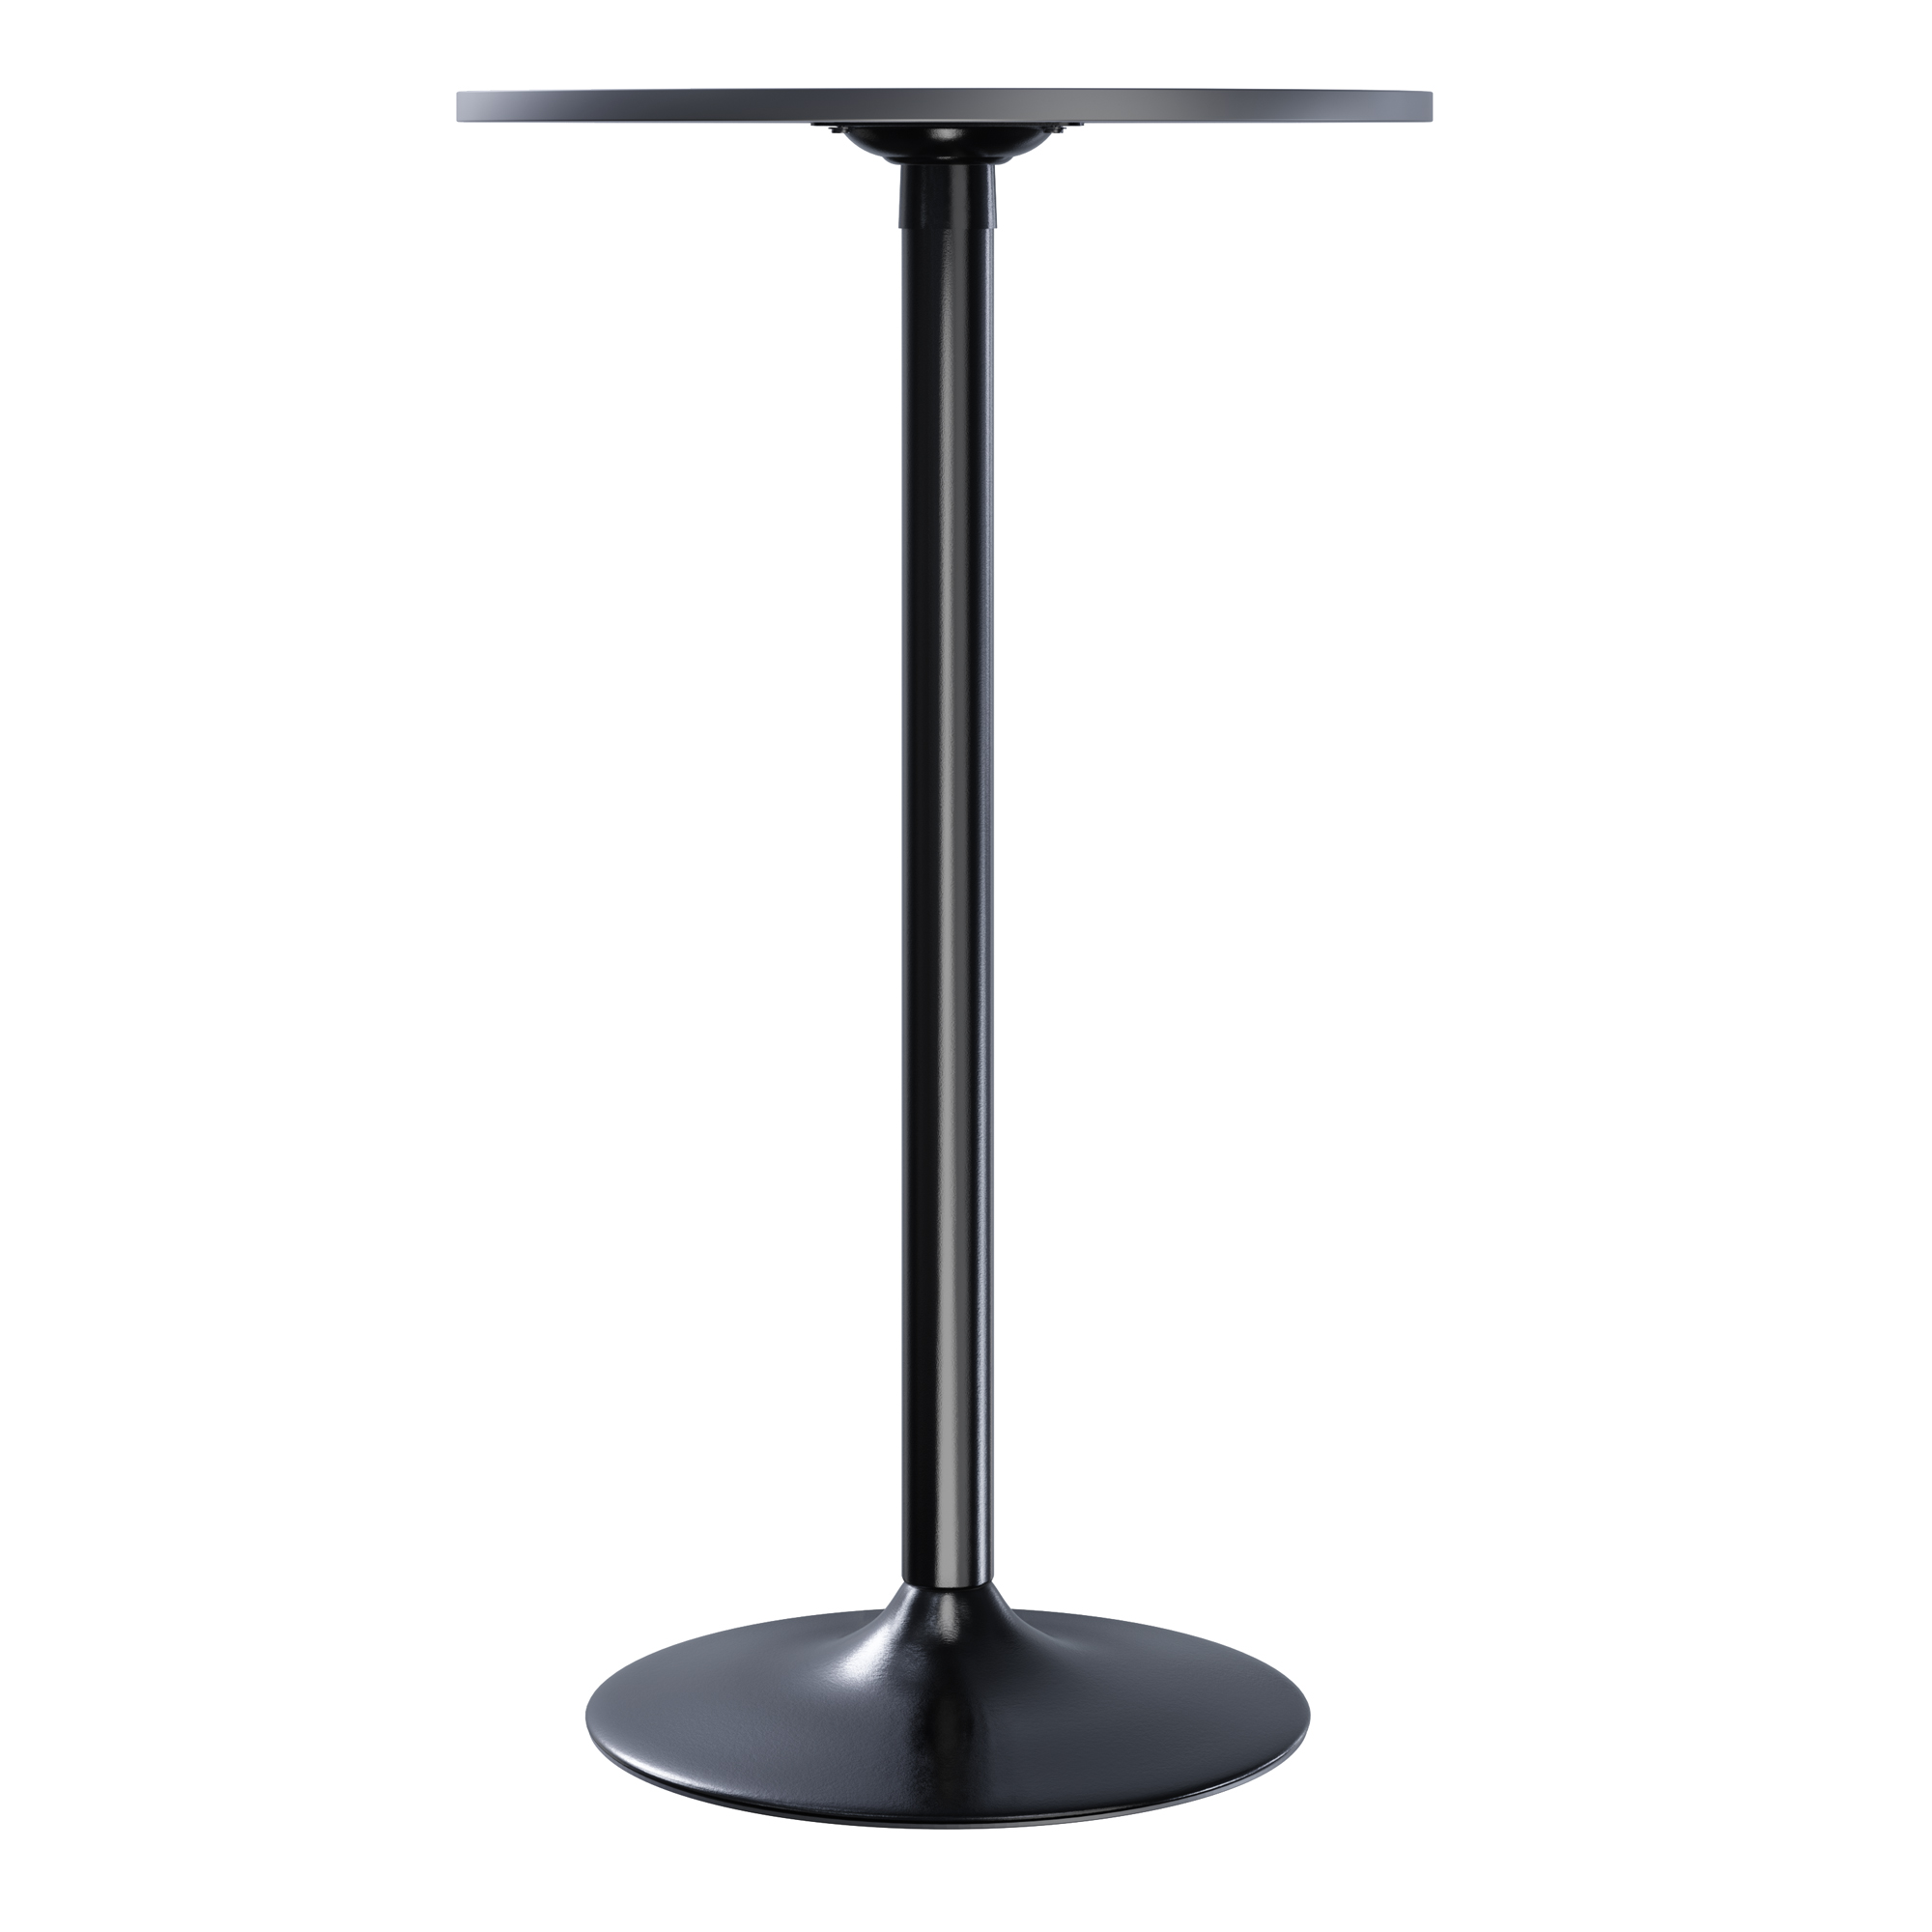 Winsome Obsidian Round Pub Table with MDF Wood Top, Legs, and Base, Black - image 3 of 7